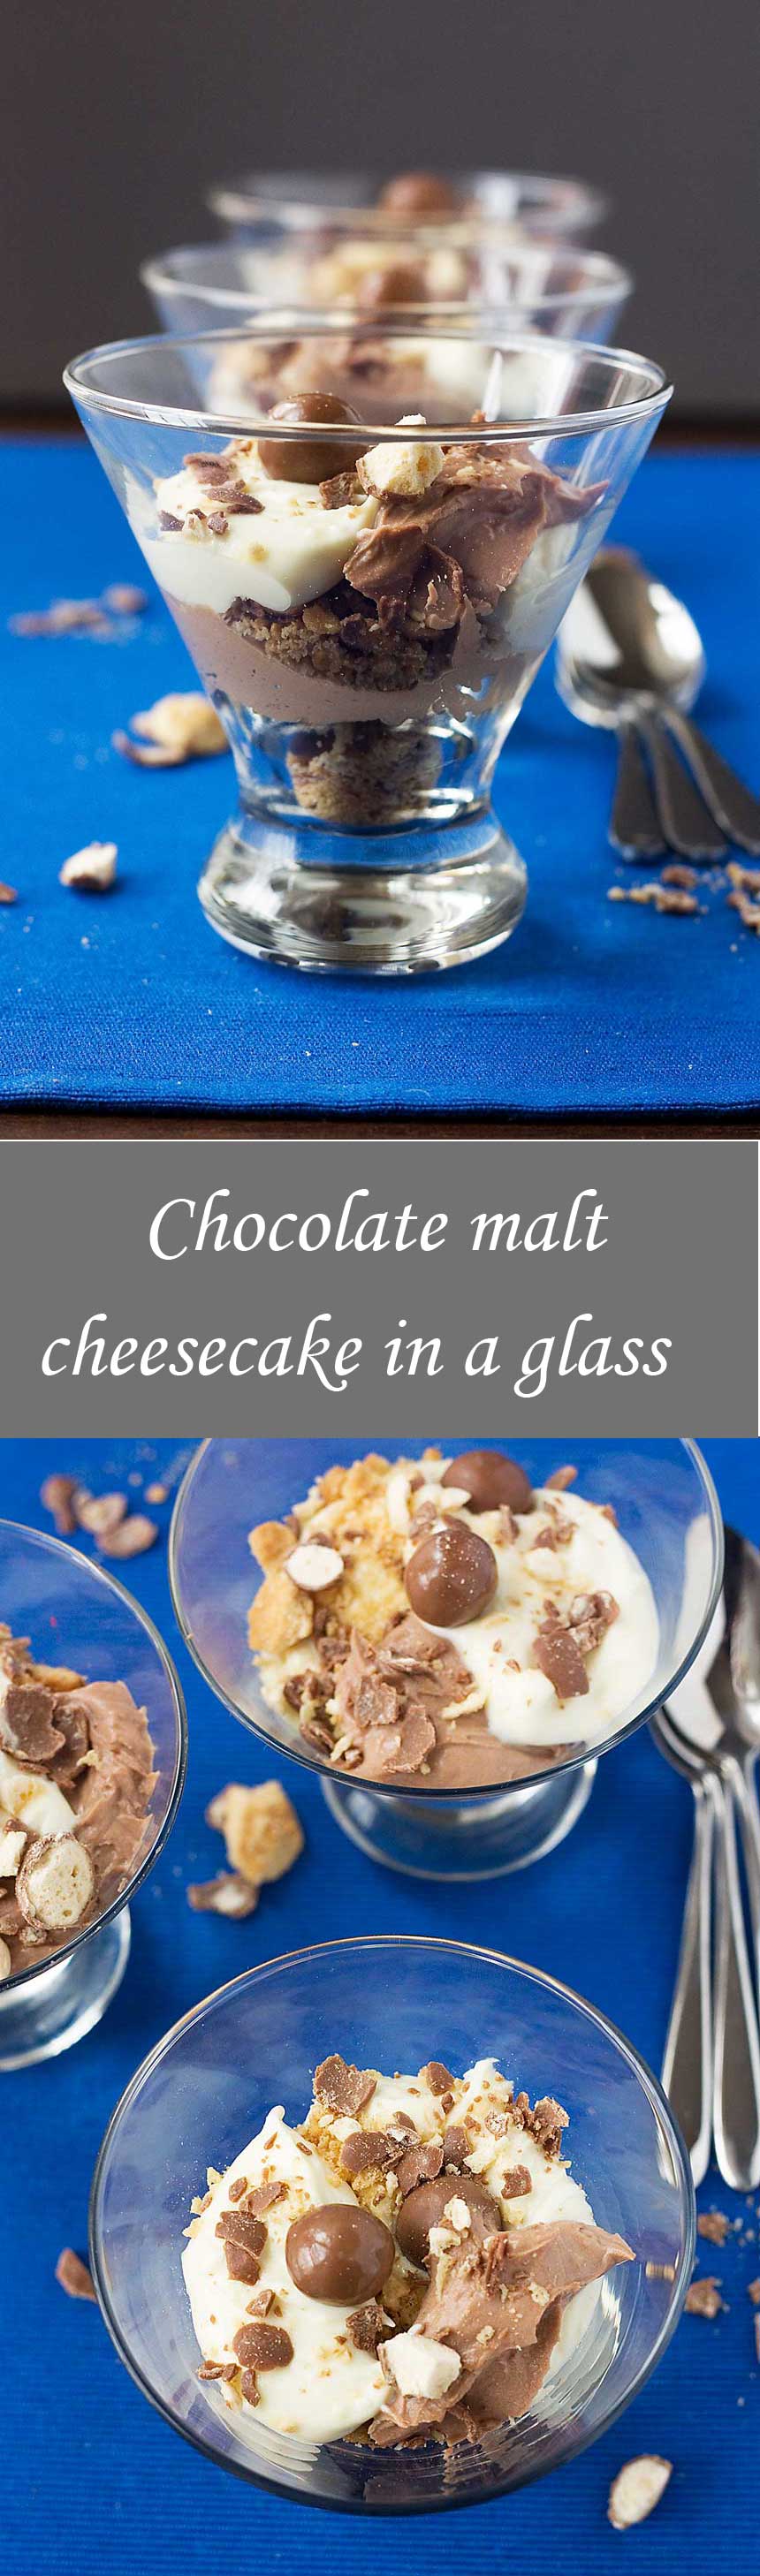 Chocolate malt cheesecake in a glass on a blue background with a title on it for Pinterest.